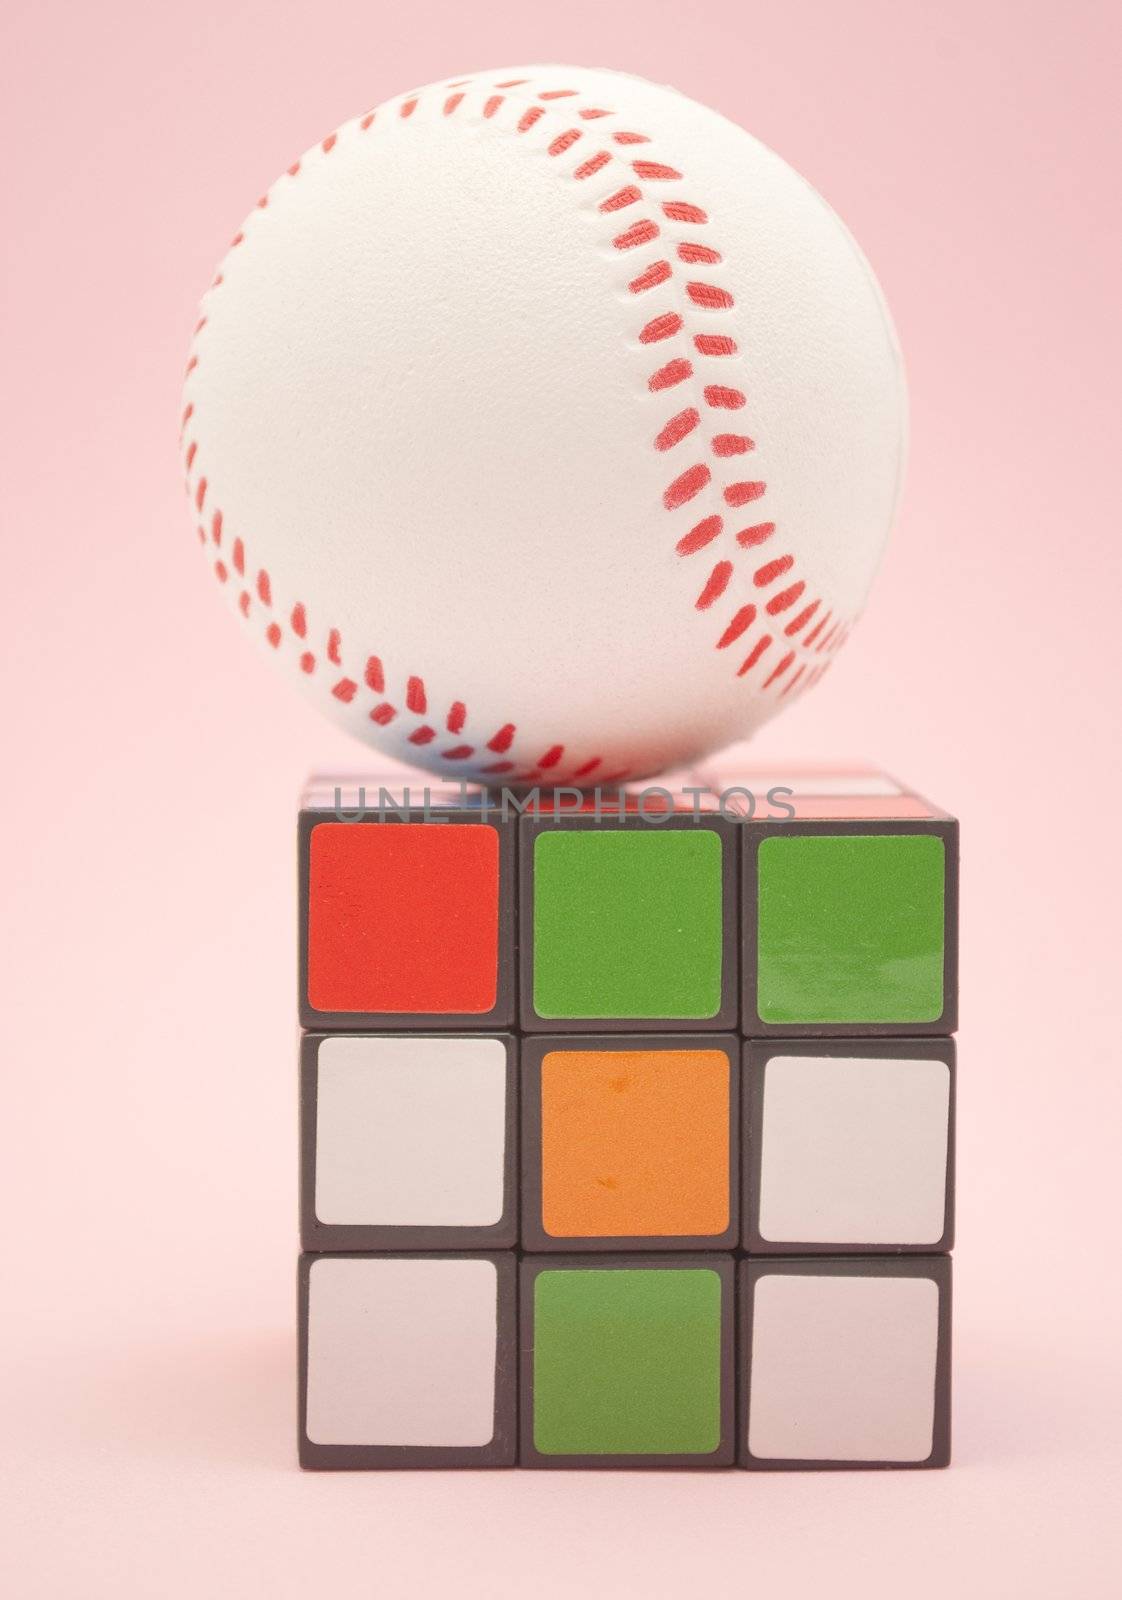 puzzles and baseball by lauria